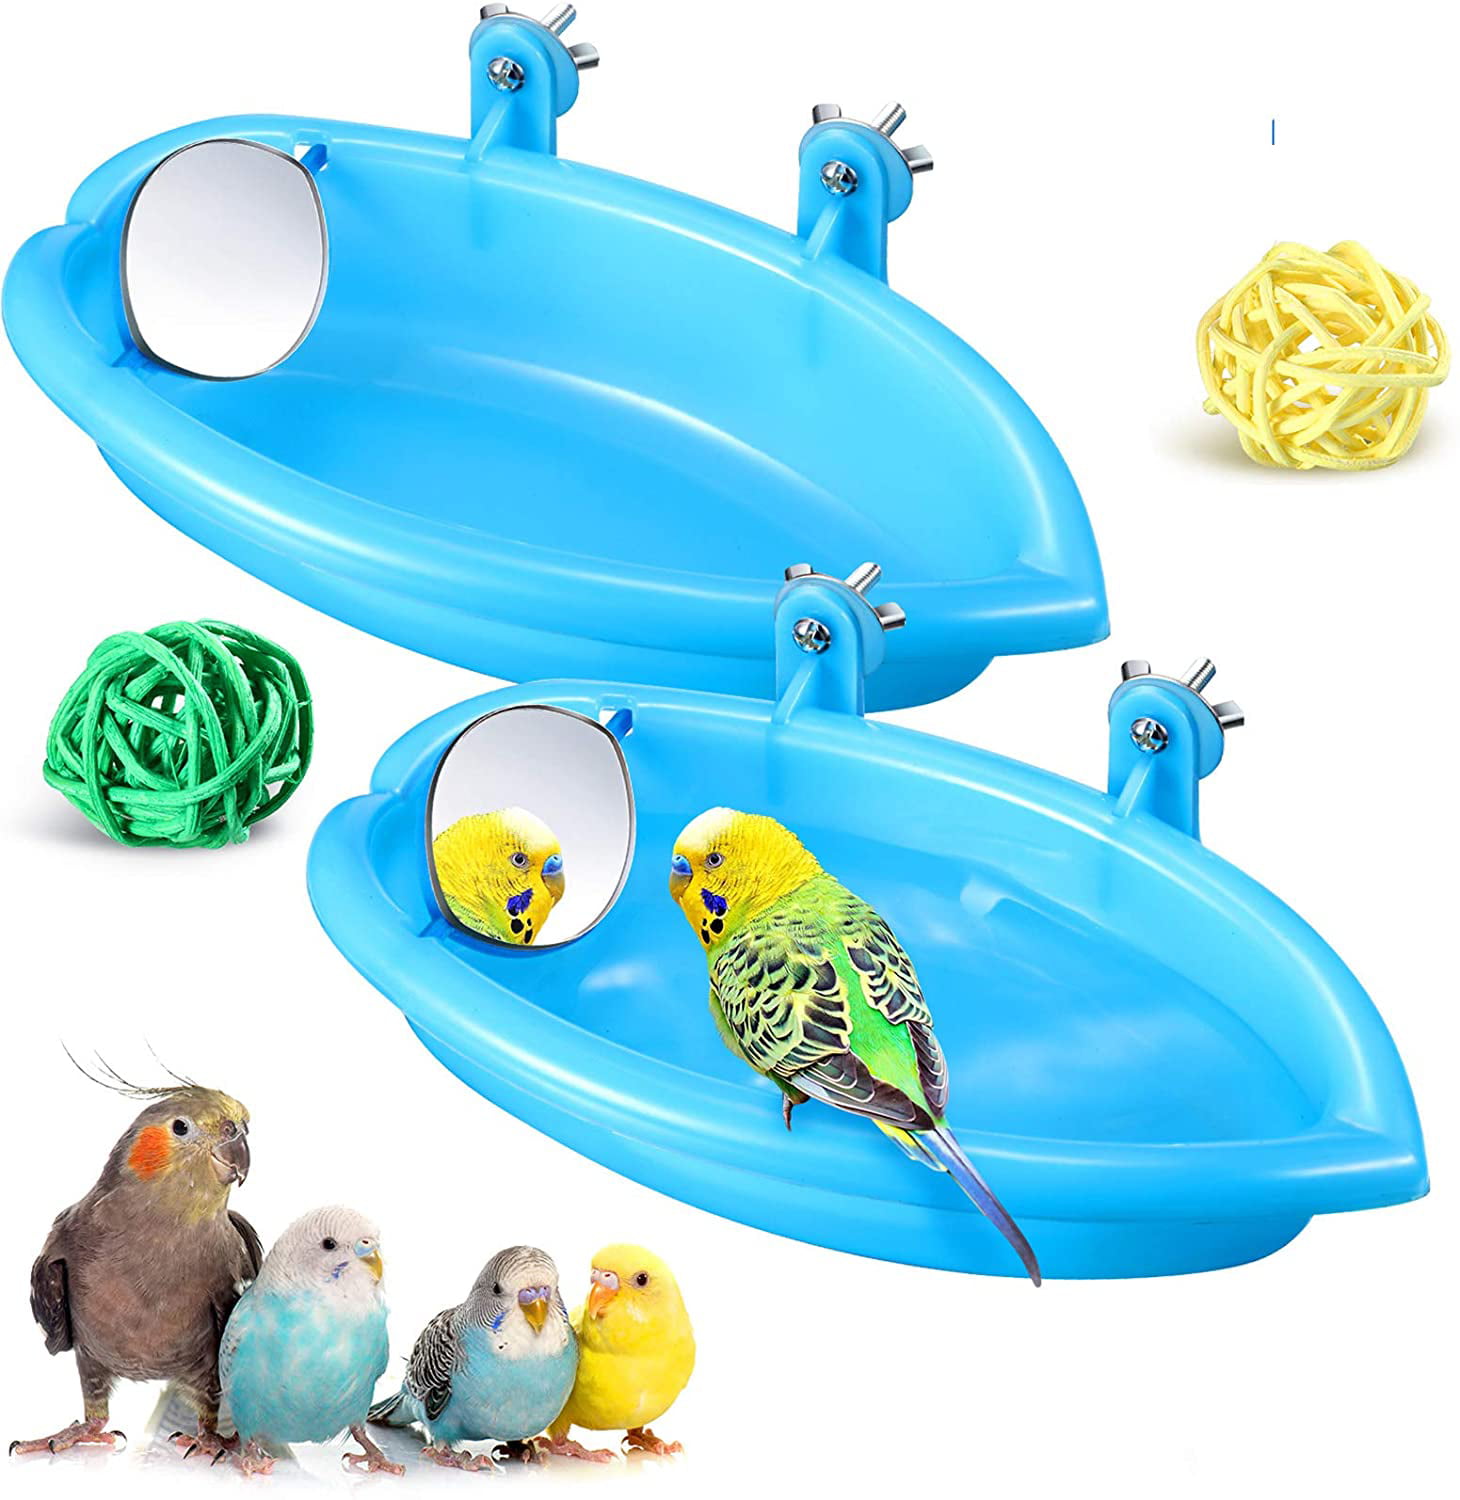 Plastic Birds Cage Bath Basin With Mirror For Pets Small Bird Parrot Bathtub New 